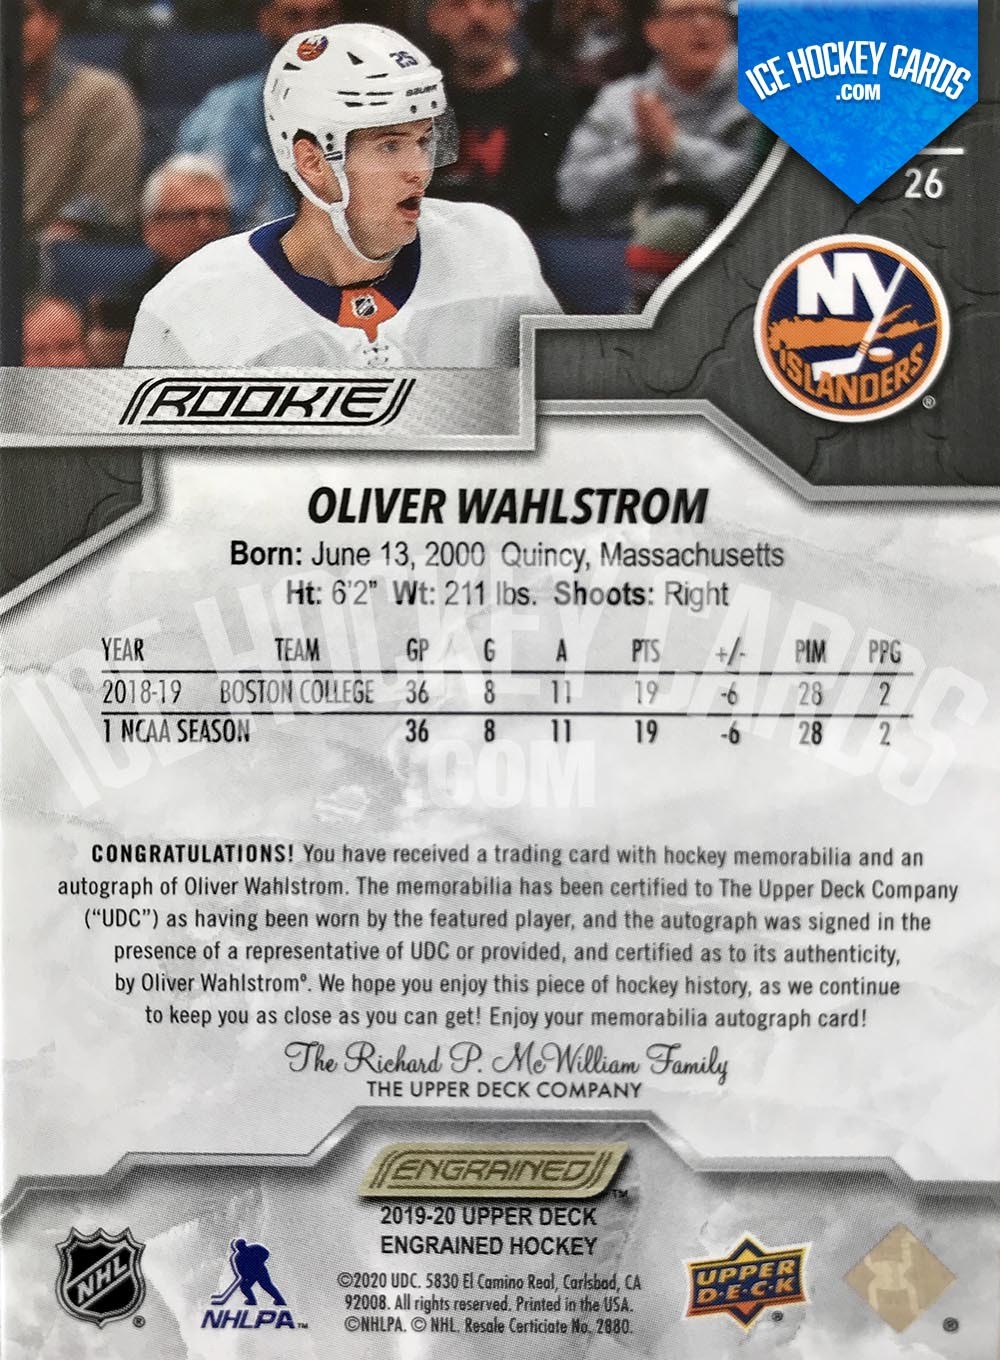 Upper Deck - Engrained 2019-20 - Oliver Wahlstrom Rookie Auto Patch Card # to 65 back